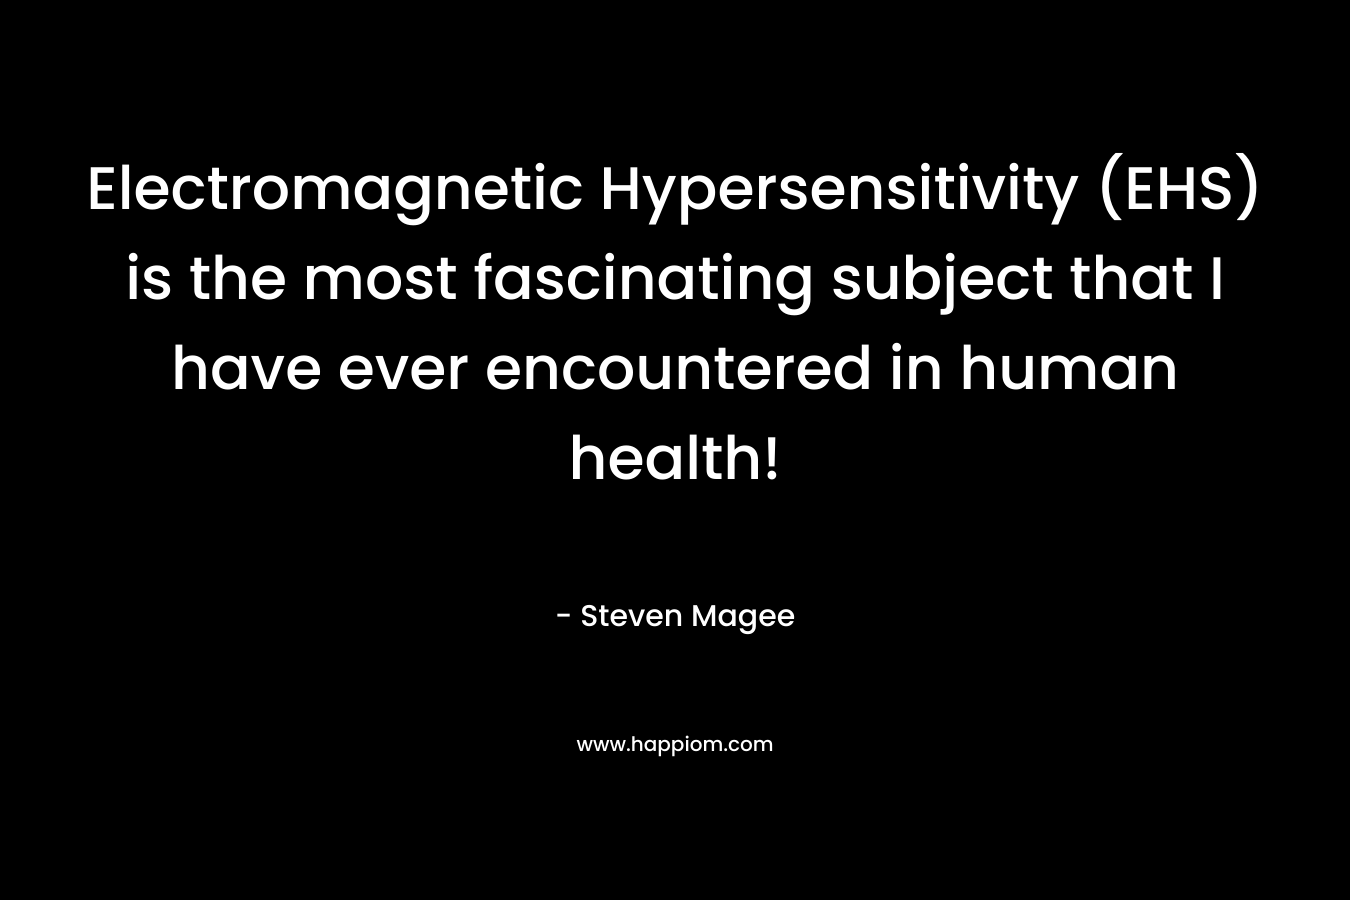 Electromagnetic Hypersensitivity (EHS) is the most fascinating subject that I have ever encountered in human health! – Steven Magee